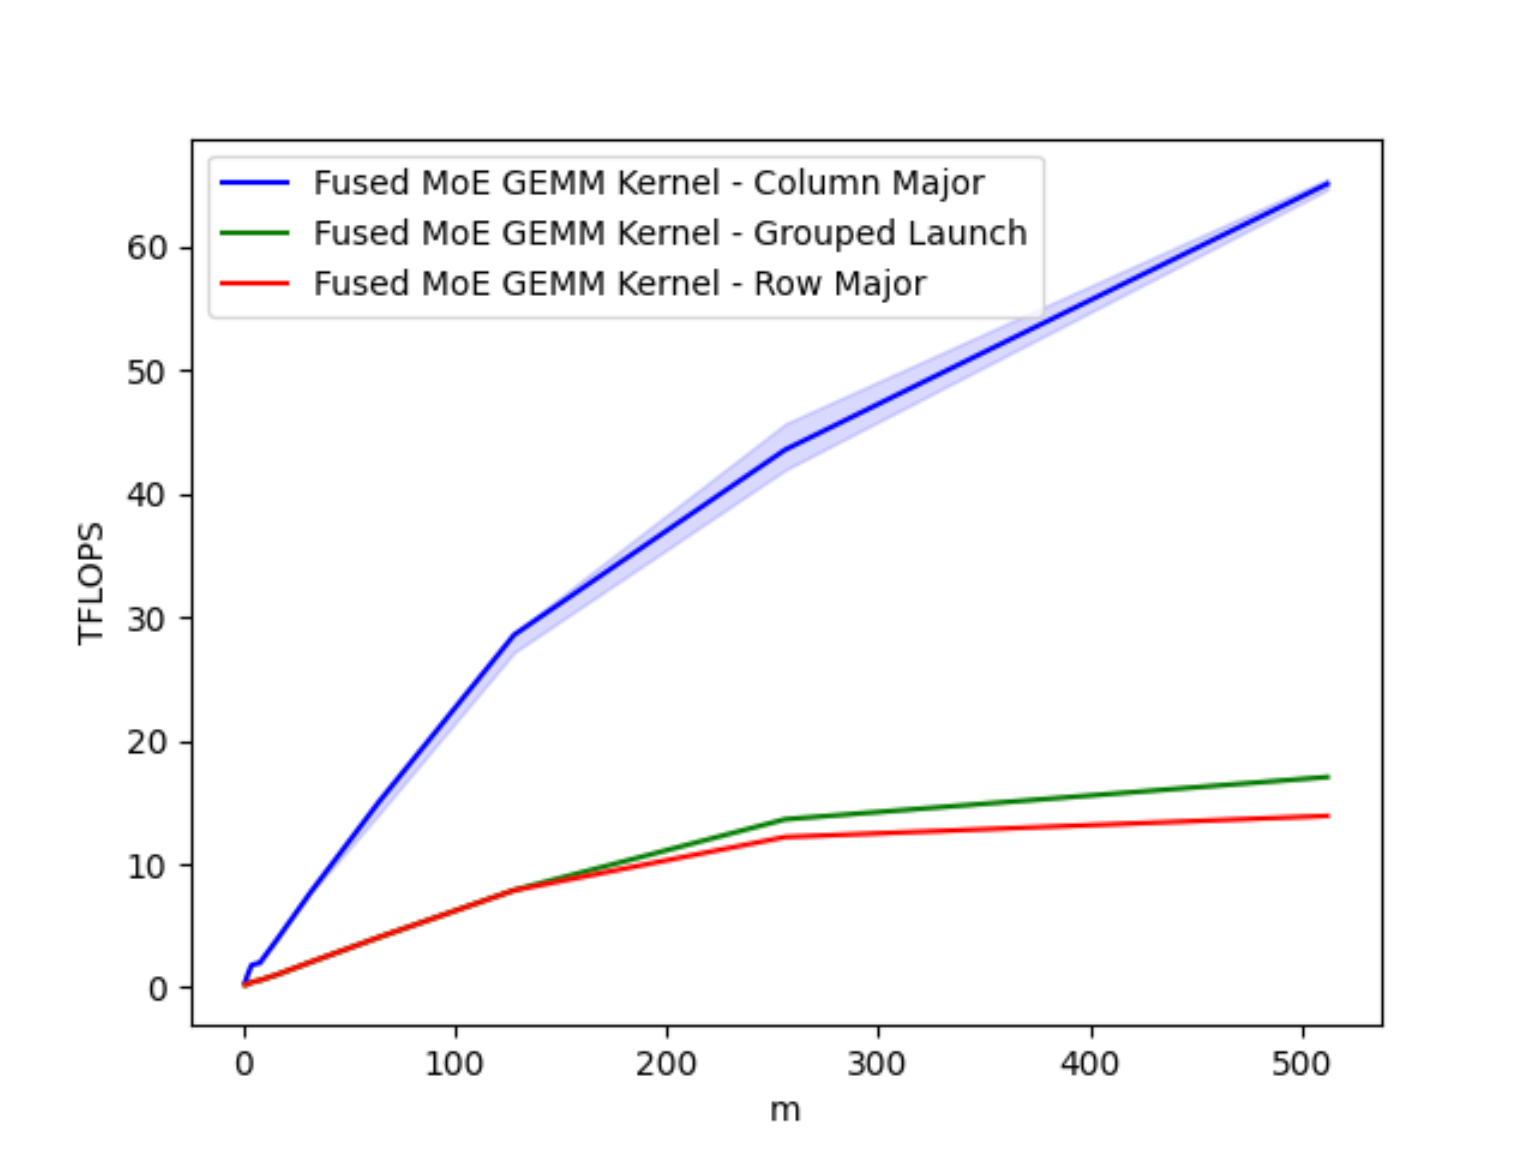 Figure 6. Comparison of GEMM Schedules on A100 for varying Batch Sizes M